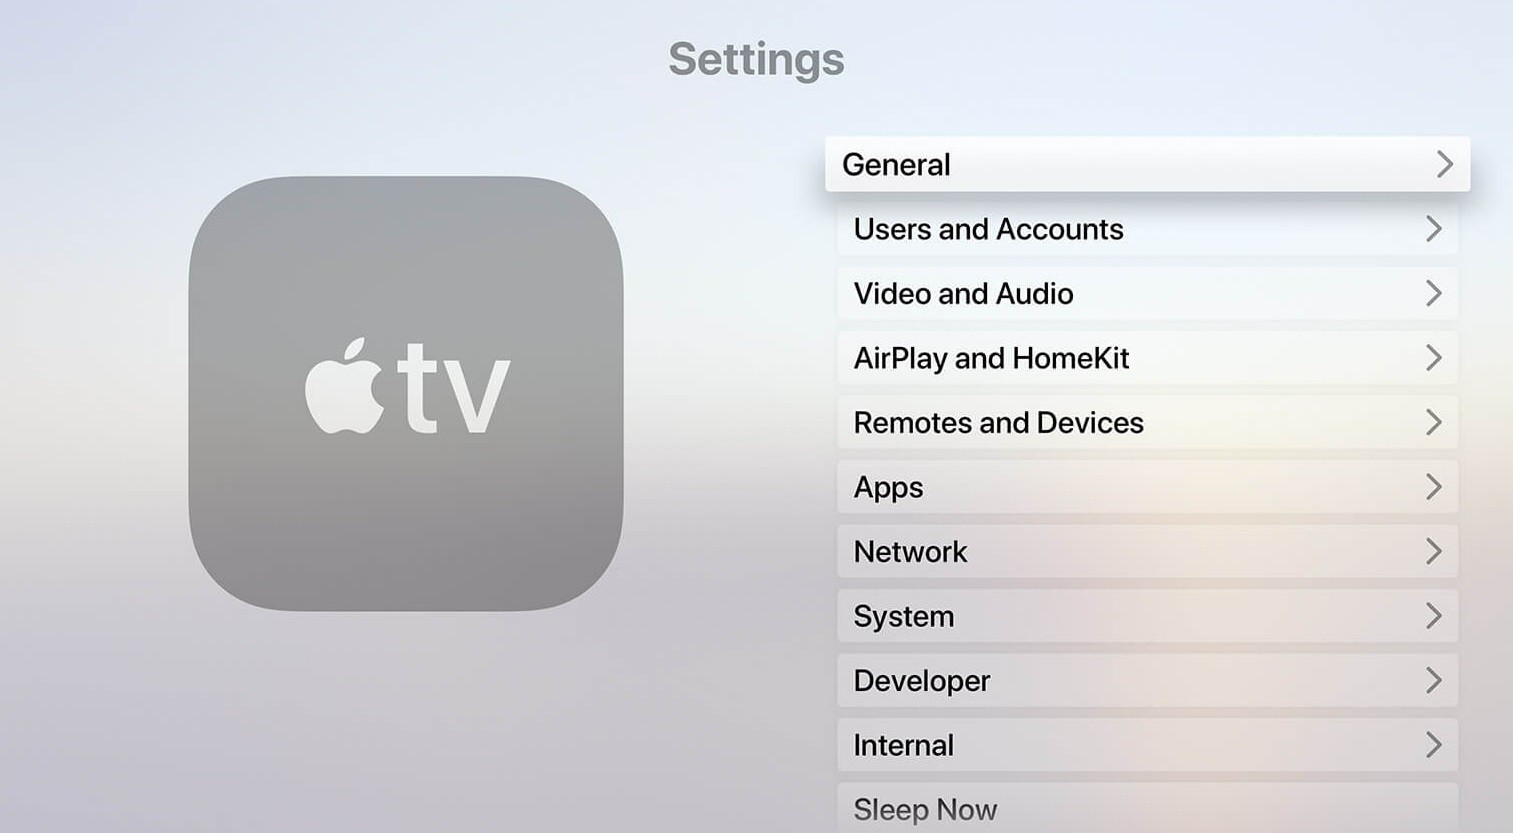 connect mac to samsung tv wireless